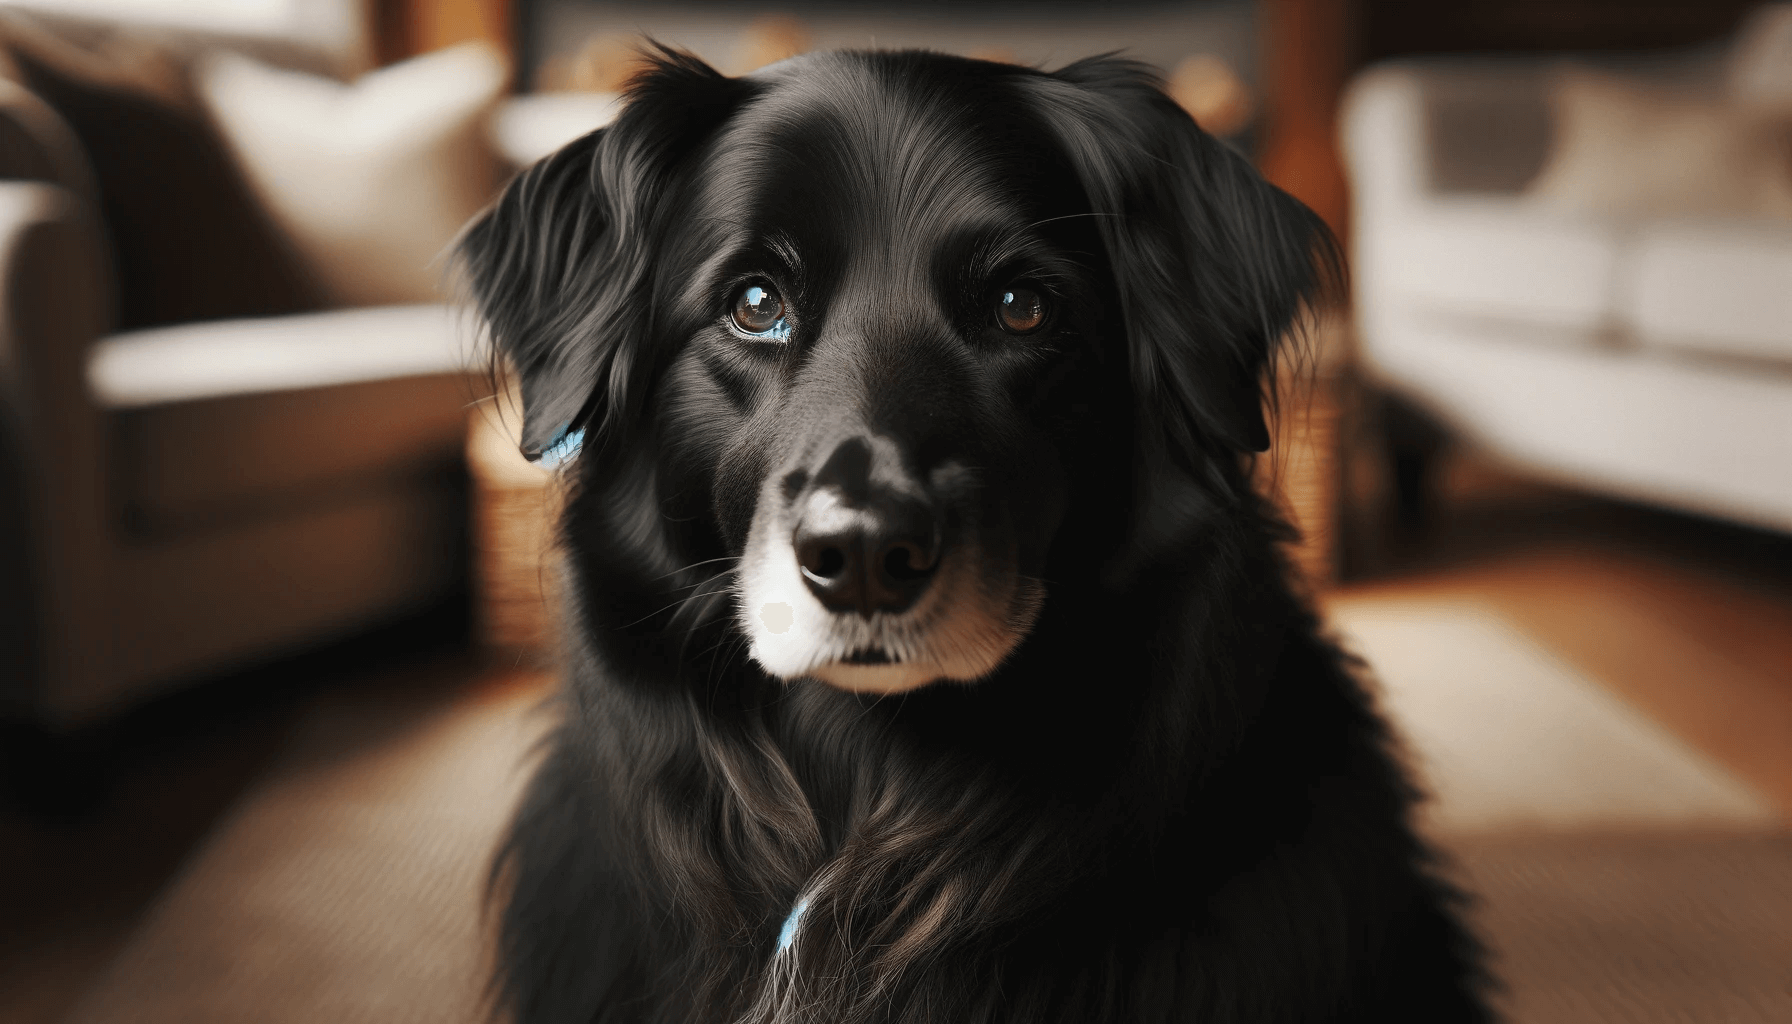 Mature Borador Border Collie Lab Mix with a solid black coat featuring soulful eyes and a relaxed posture, indicative of a well-socialized dog.